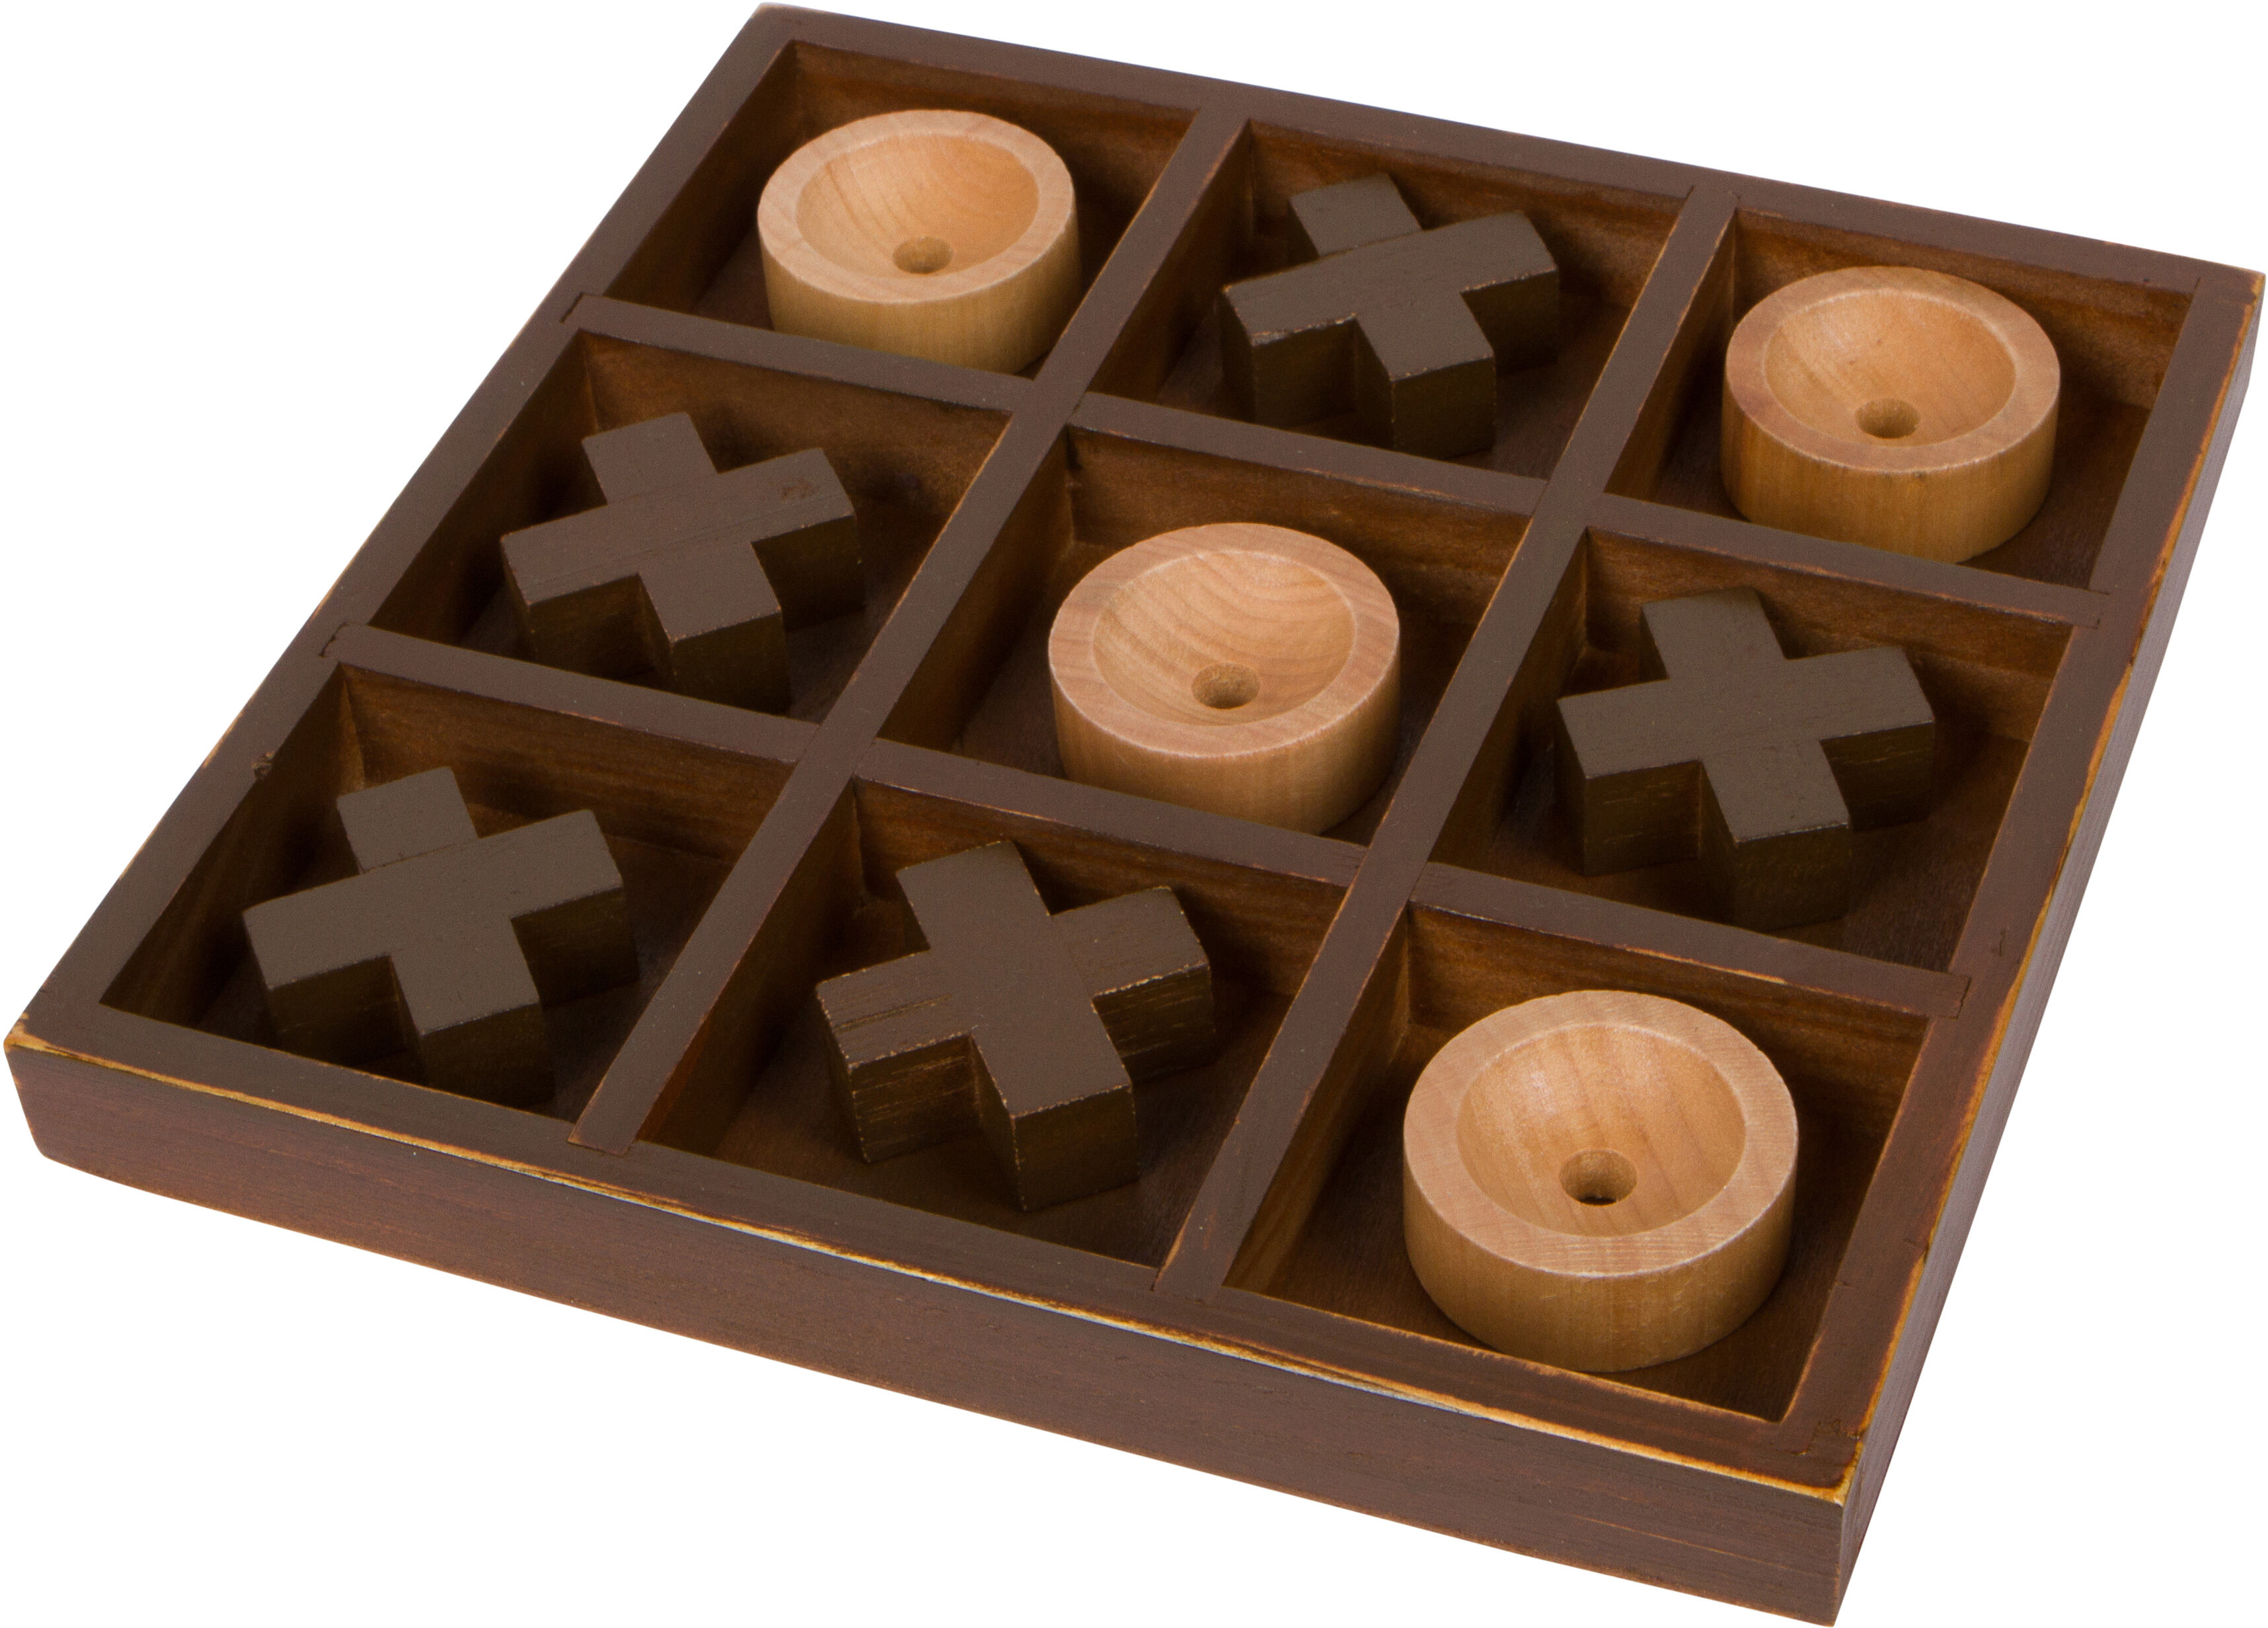 Wooden Tic-Tac-Toe Board Game